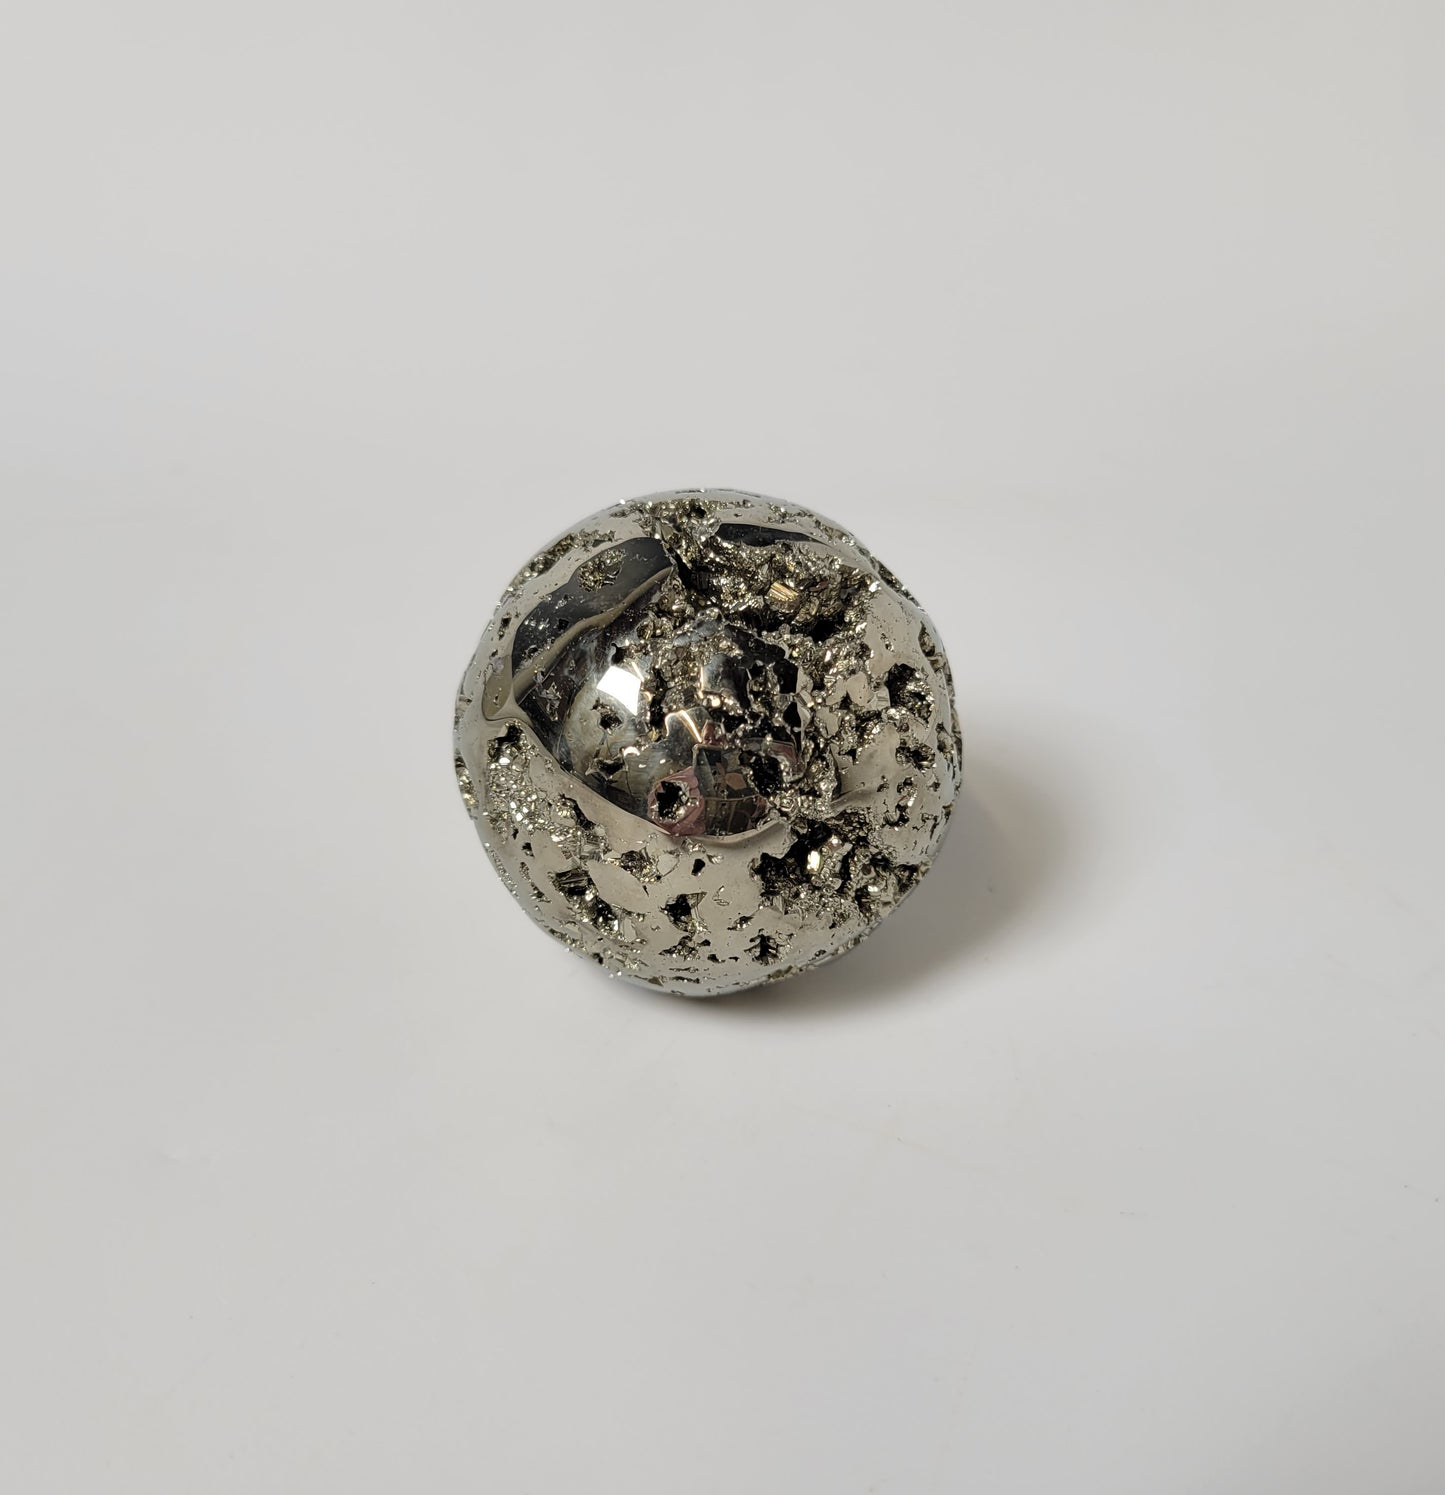 Pyrite Polished Sphere from Spain (2-inch diameter)